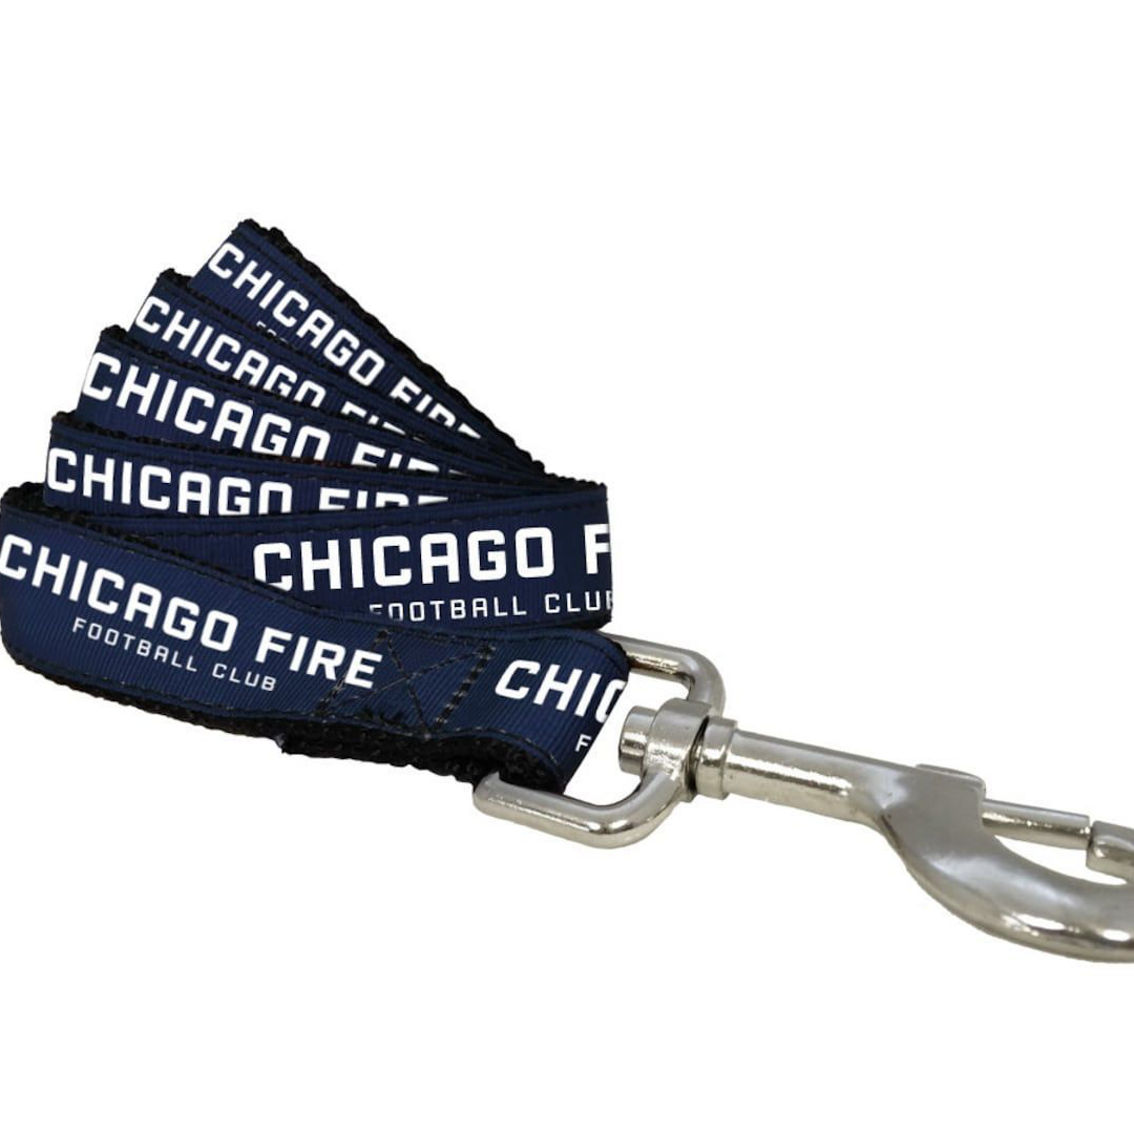 All Star Dogs Chicago Fire Dog Leash - Image 2 of 2